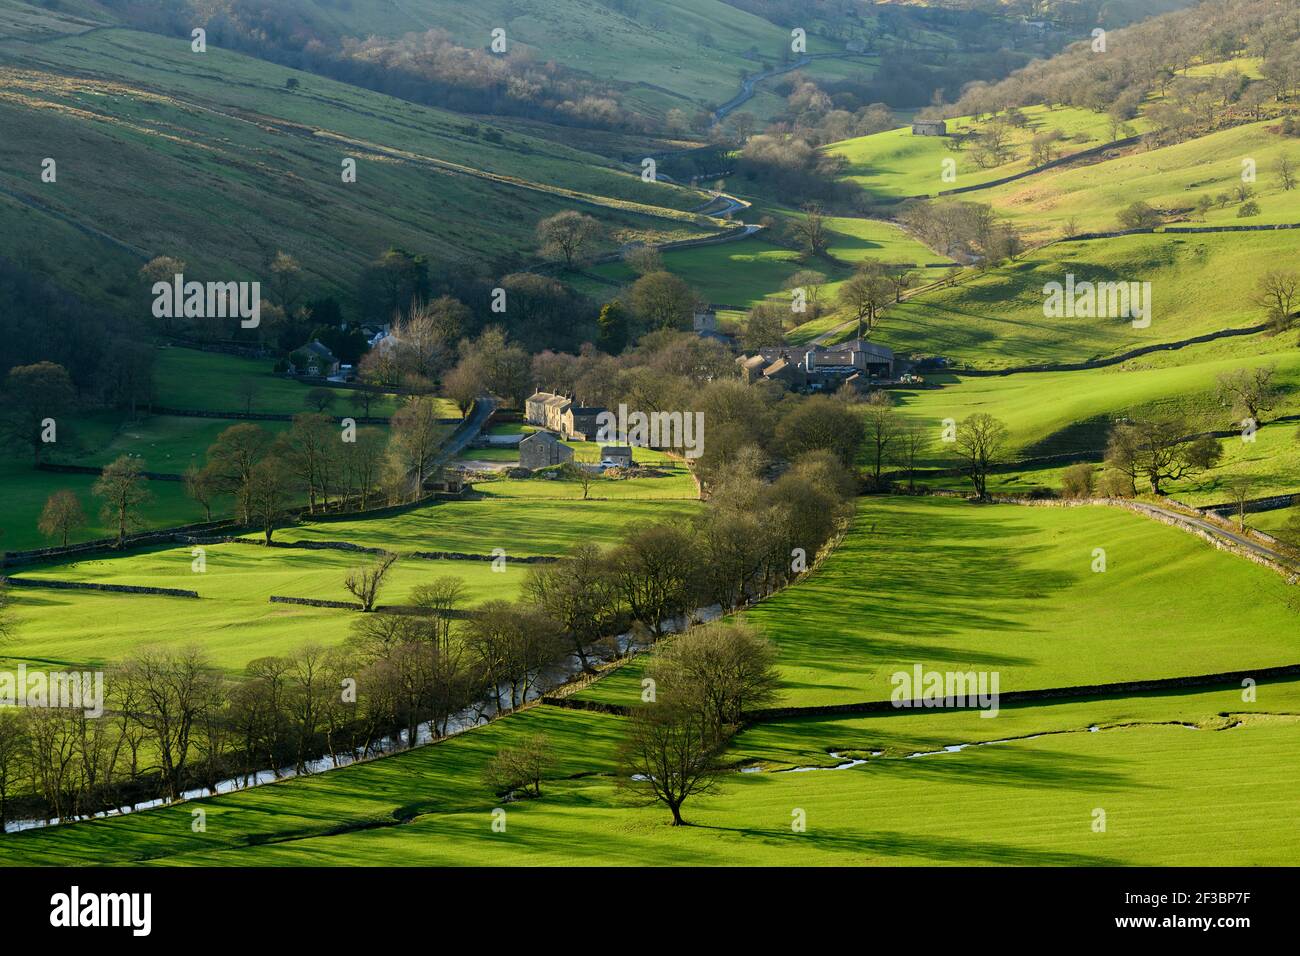 Picturesque Dales village (cottages & farms) & River Wharfe, nestling by hills & hillsides in steep-sided valley - Hubberholme, Yorkshire, England, UK Foto Stock